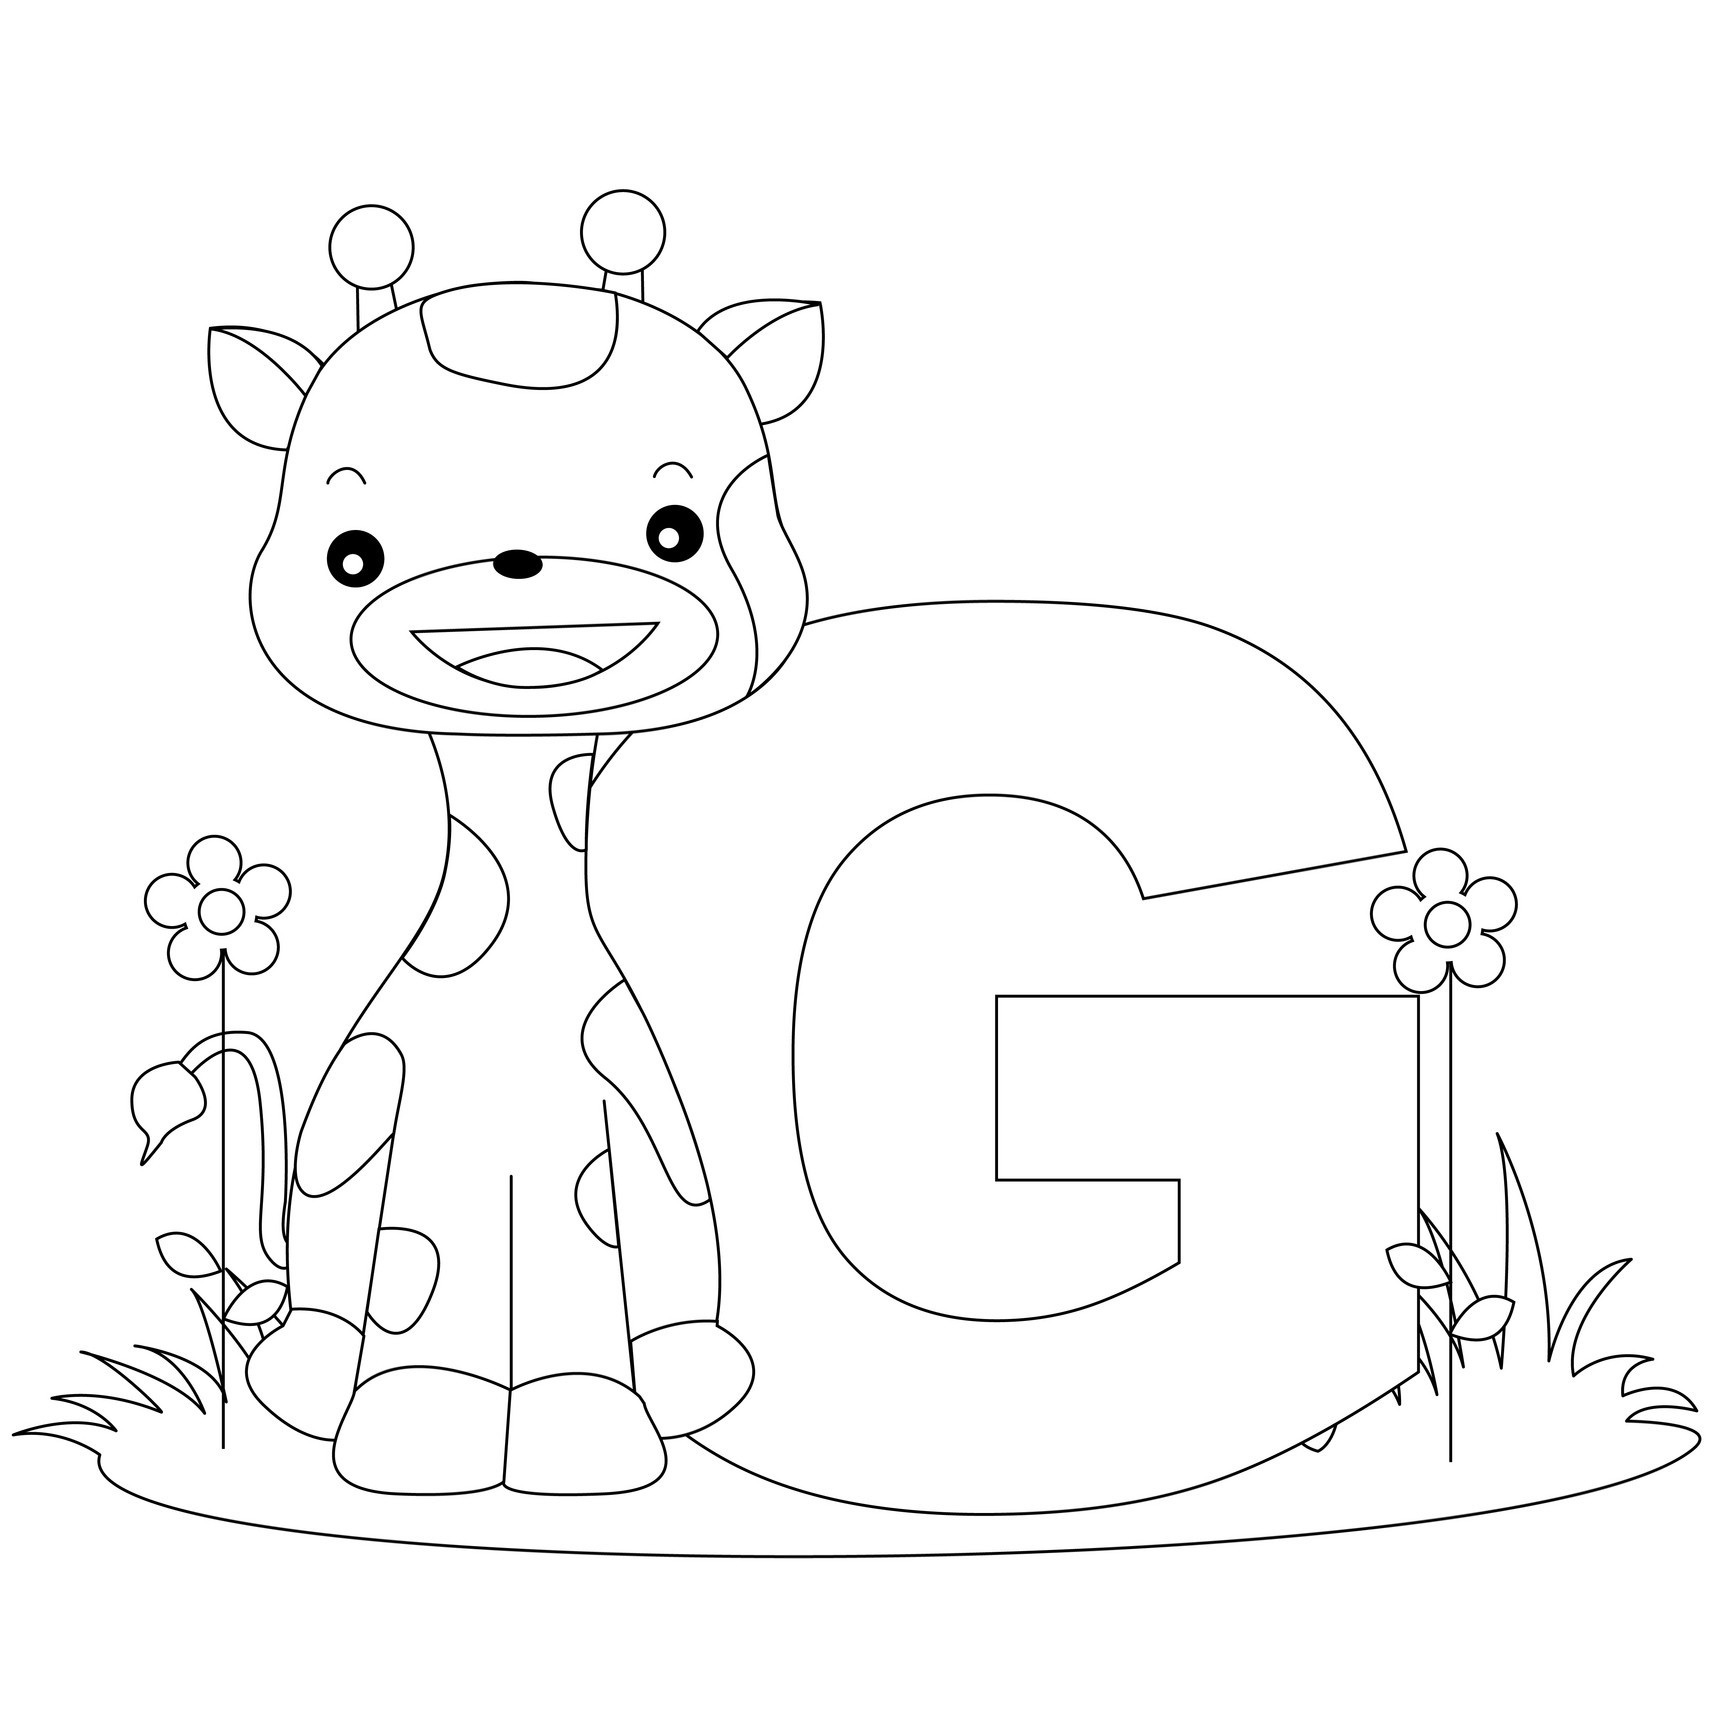 Free Printable Alphabet Coloring Pages For Kids Best Coloring Pages For Kids